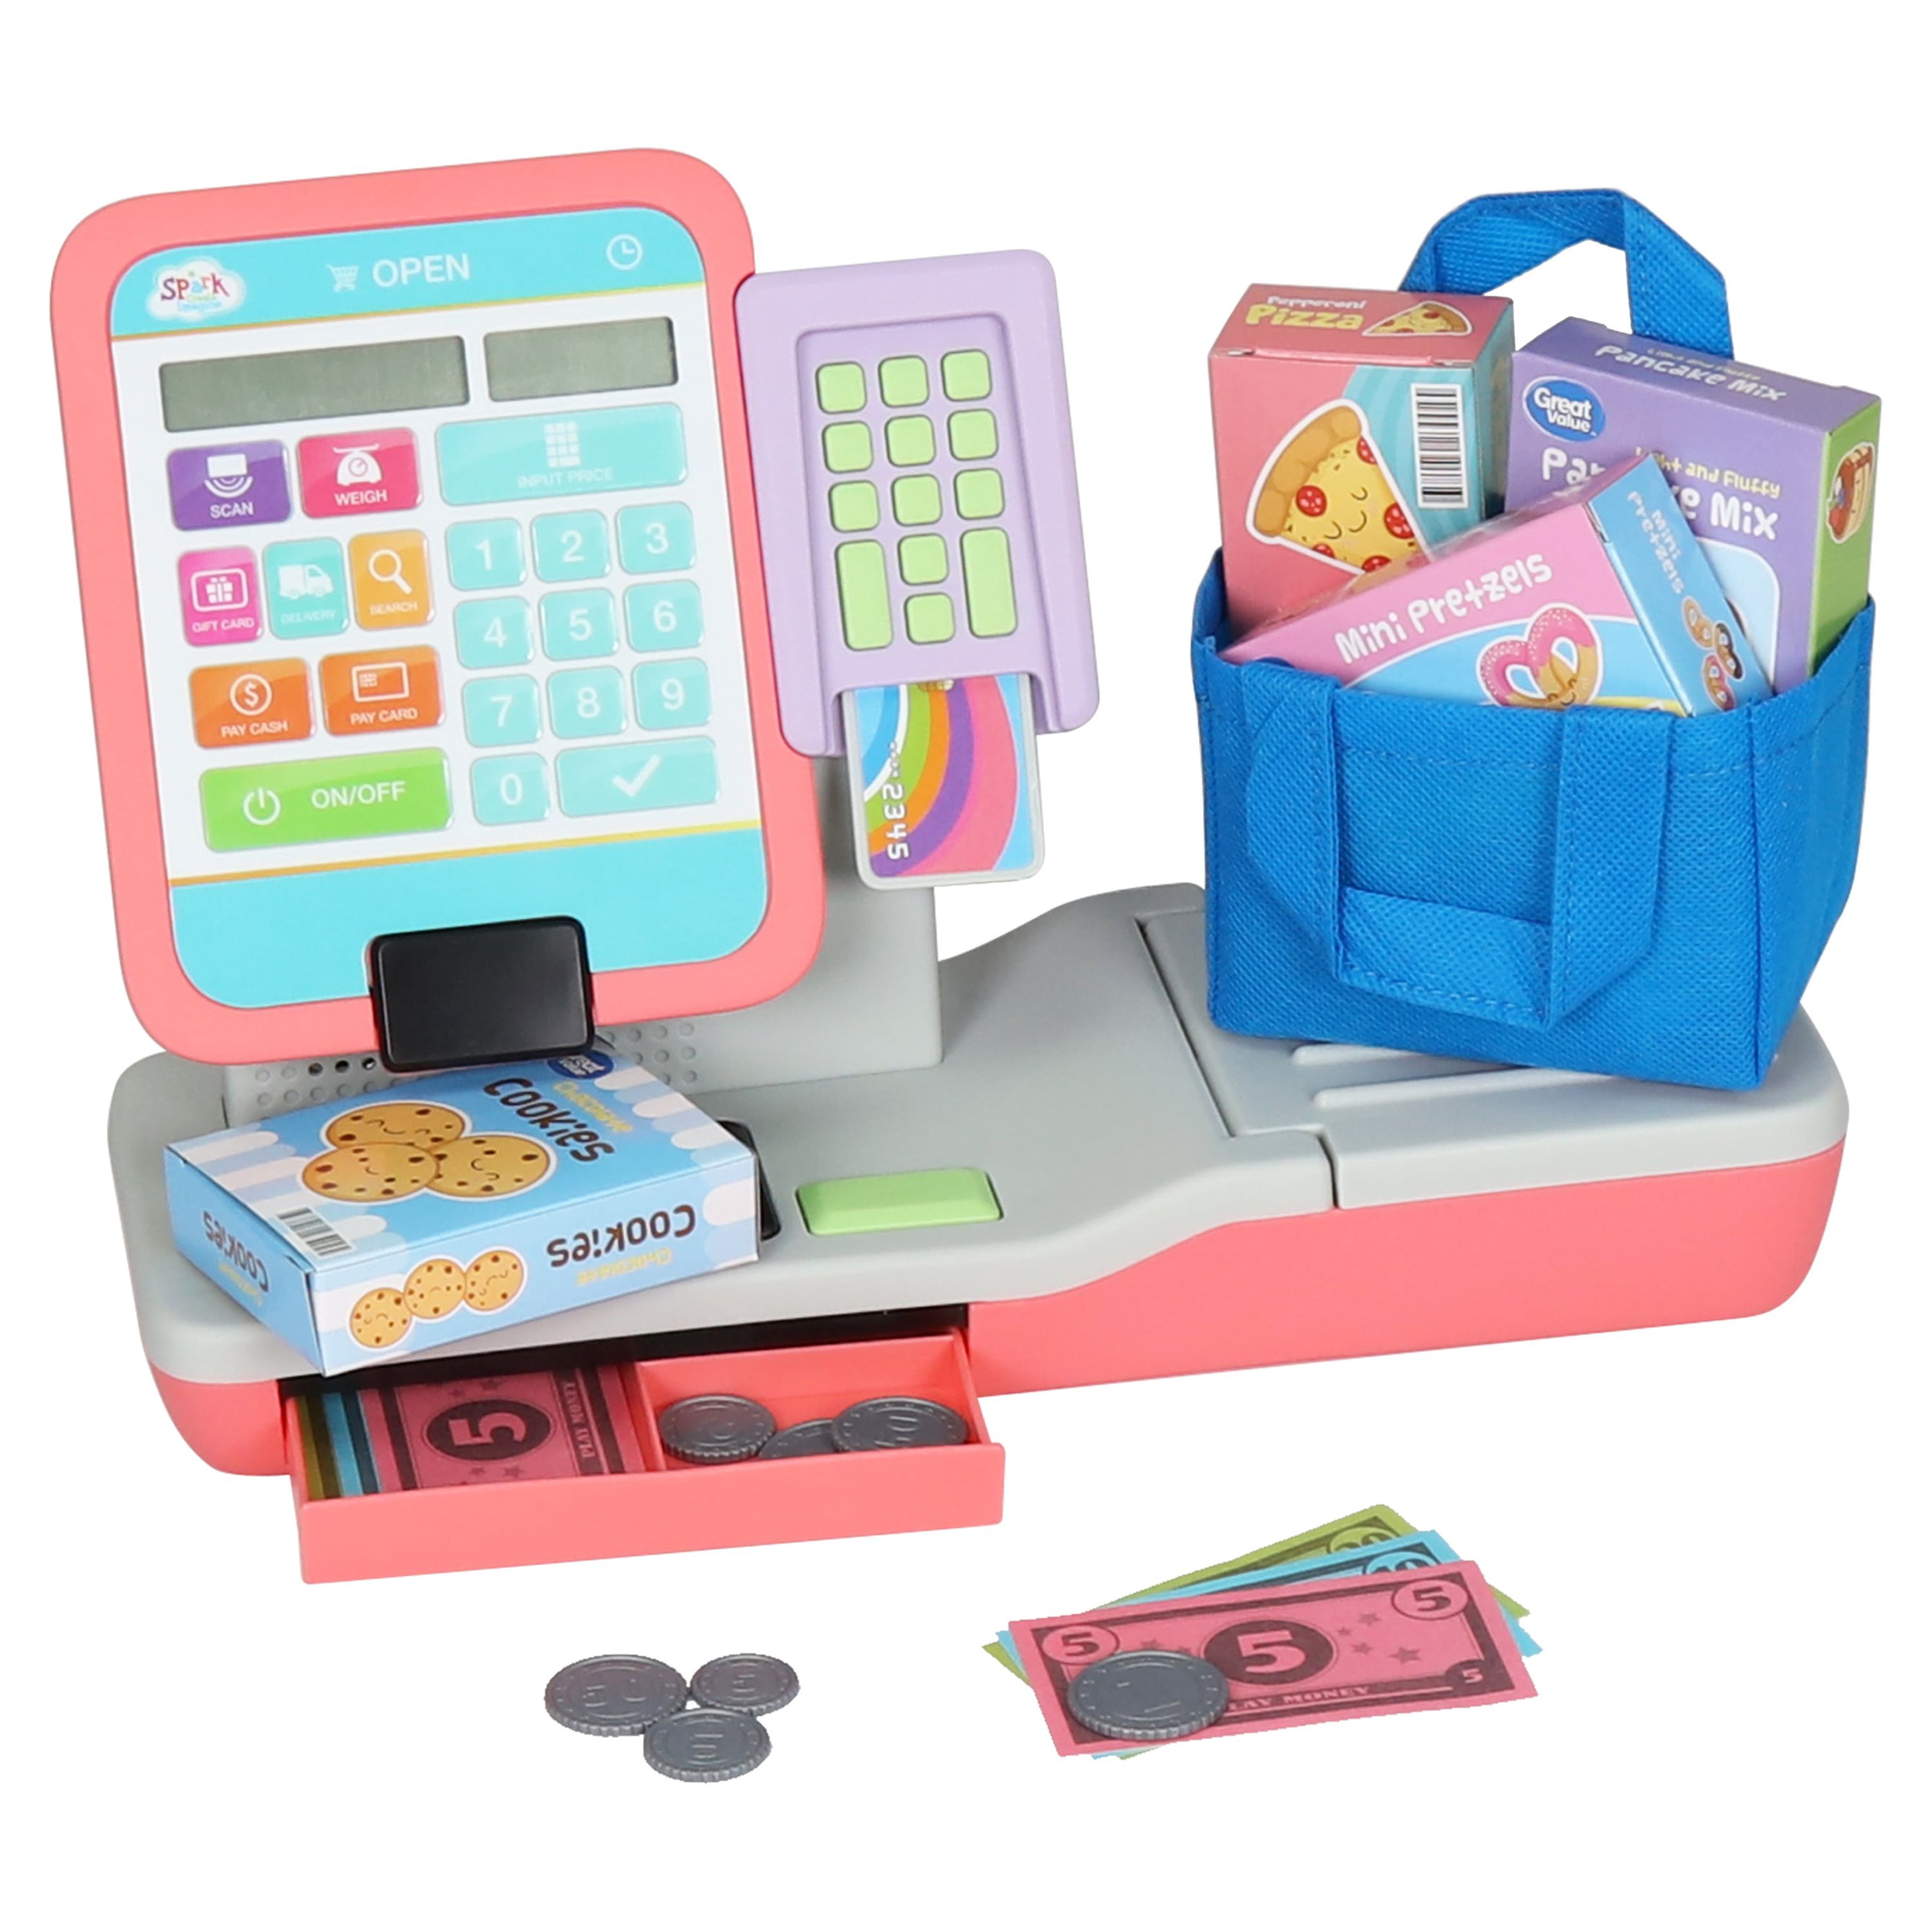 Spark Create Imagine Check Out Station Play Cash Register with Play Money, 21 Pieces - image 5 of 6